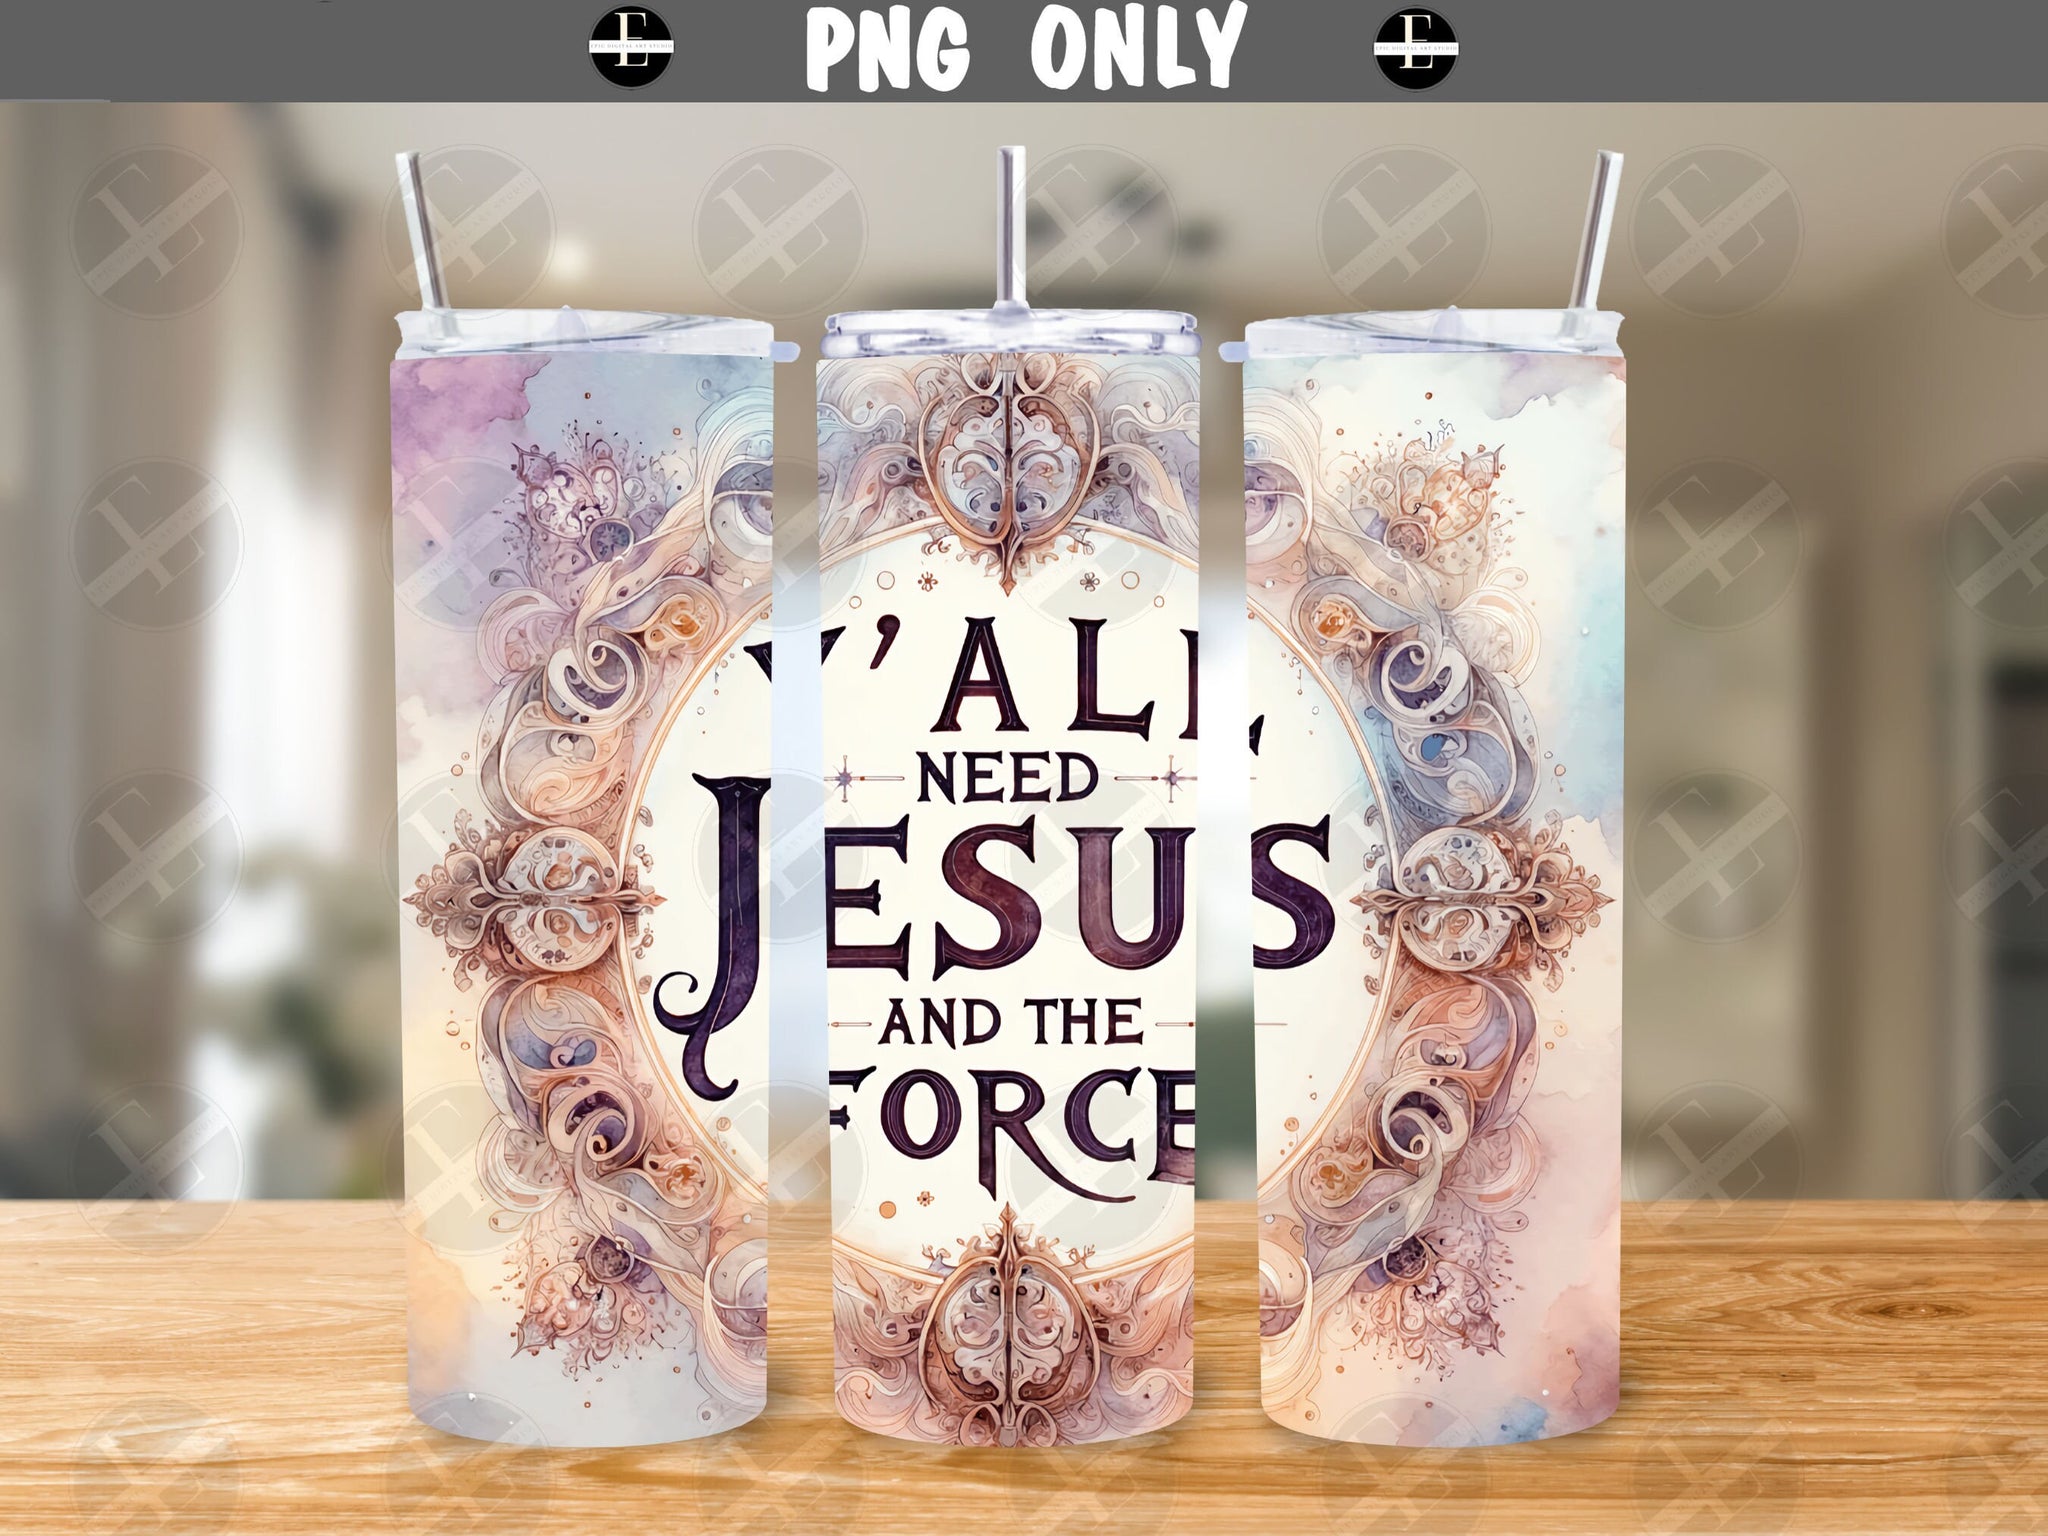 Funny Tumbler Wraps - Y'all Need Jesus-and the Force Skinny Tumbler Wrap Design - Sublimation Designs Straight & Tapered - Instant Download